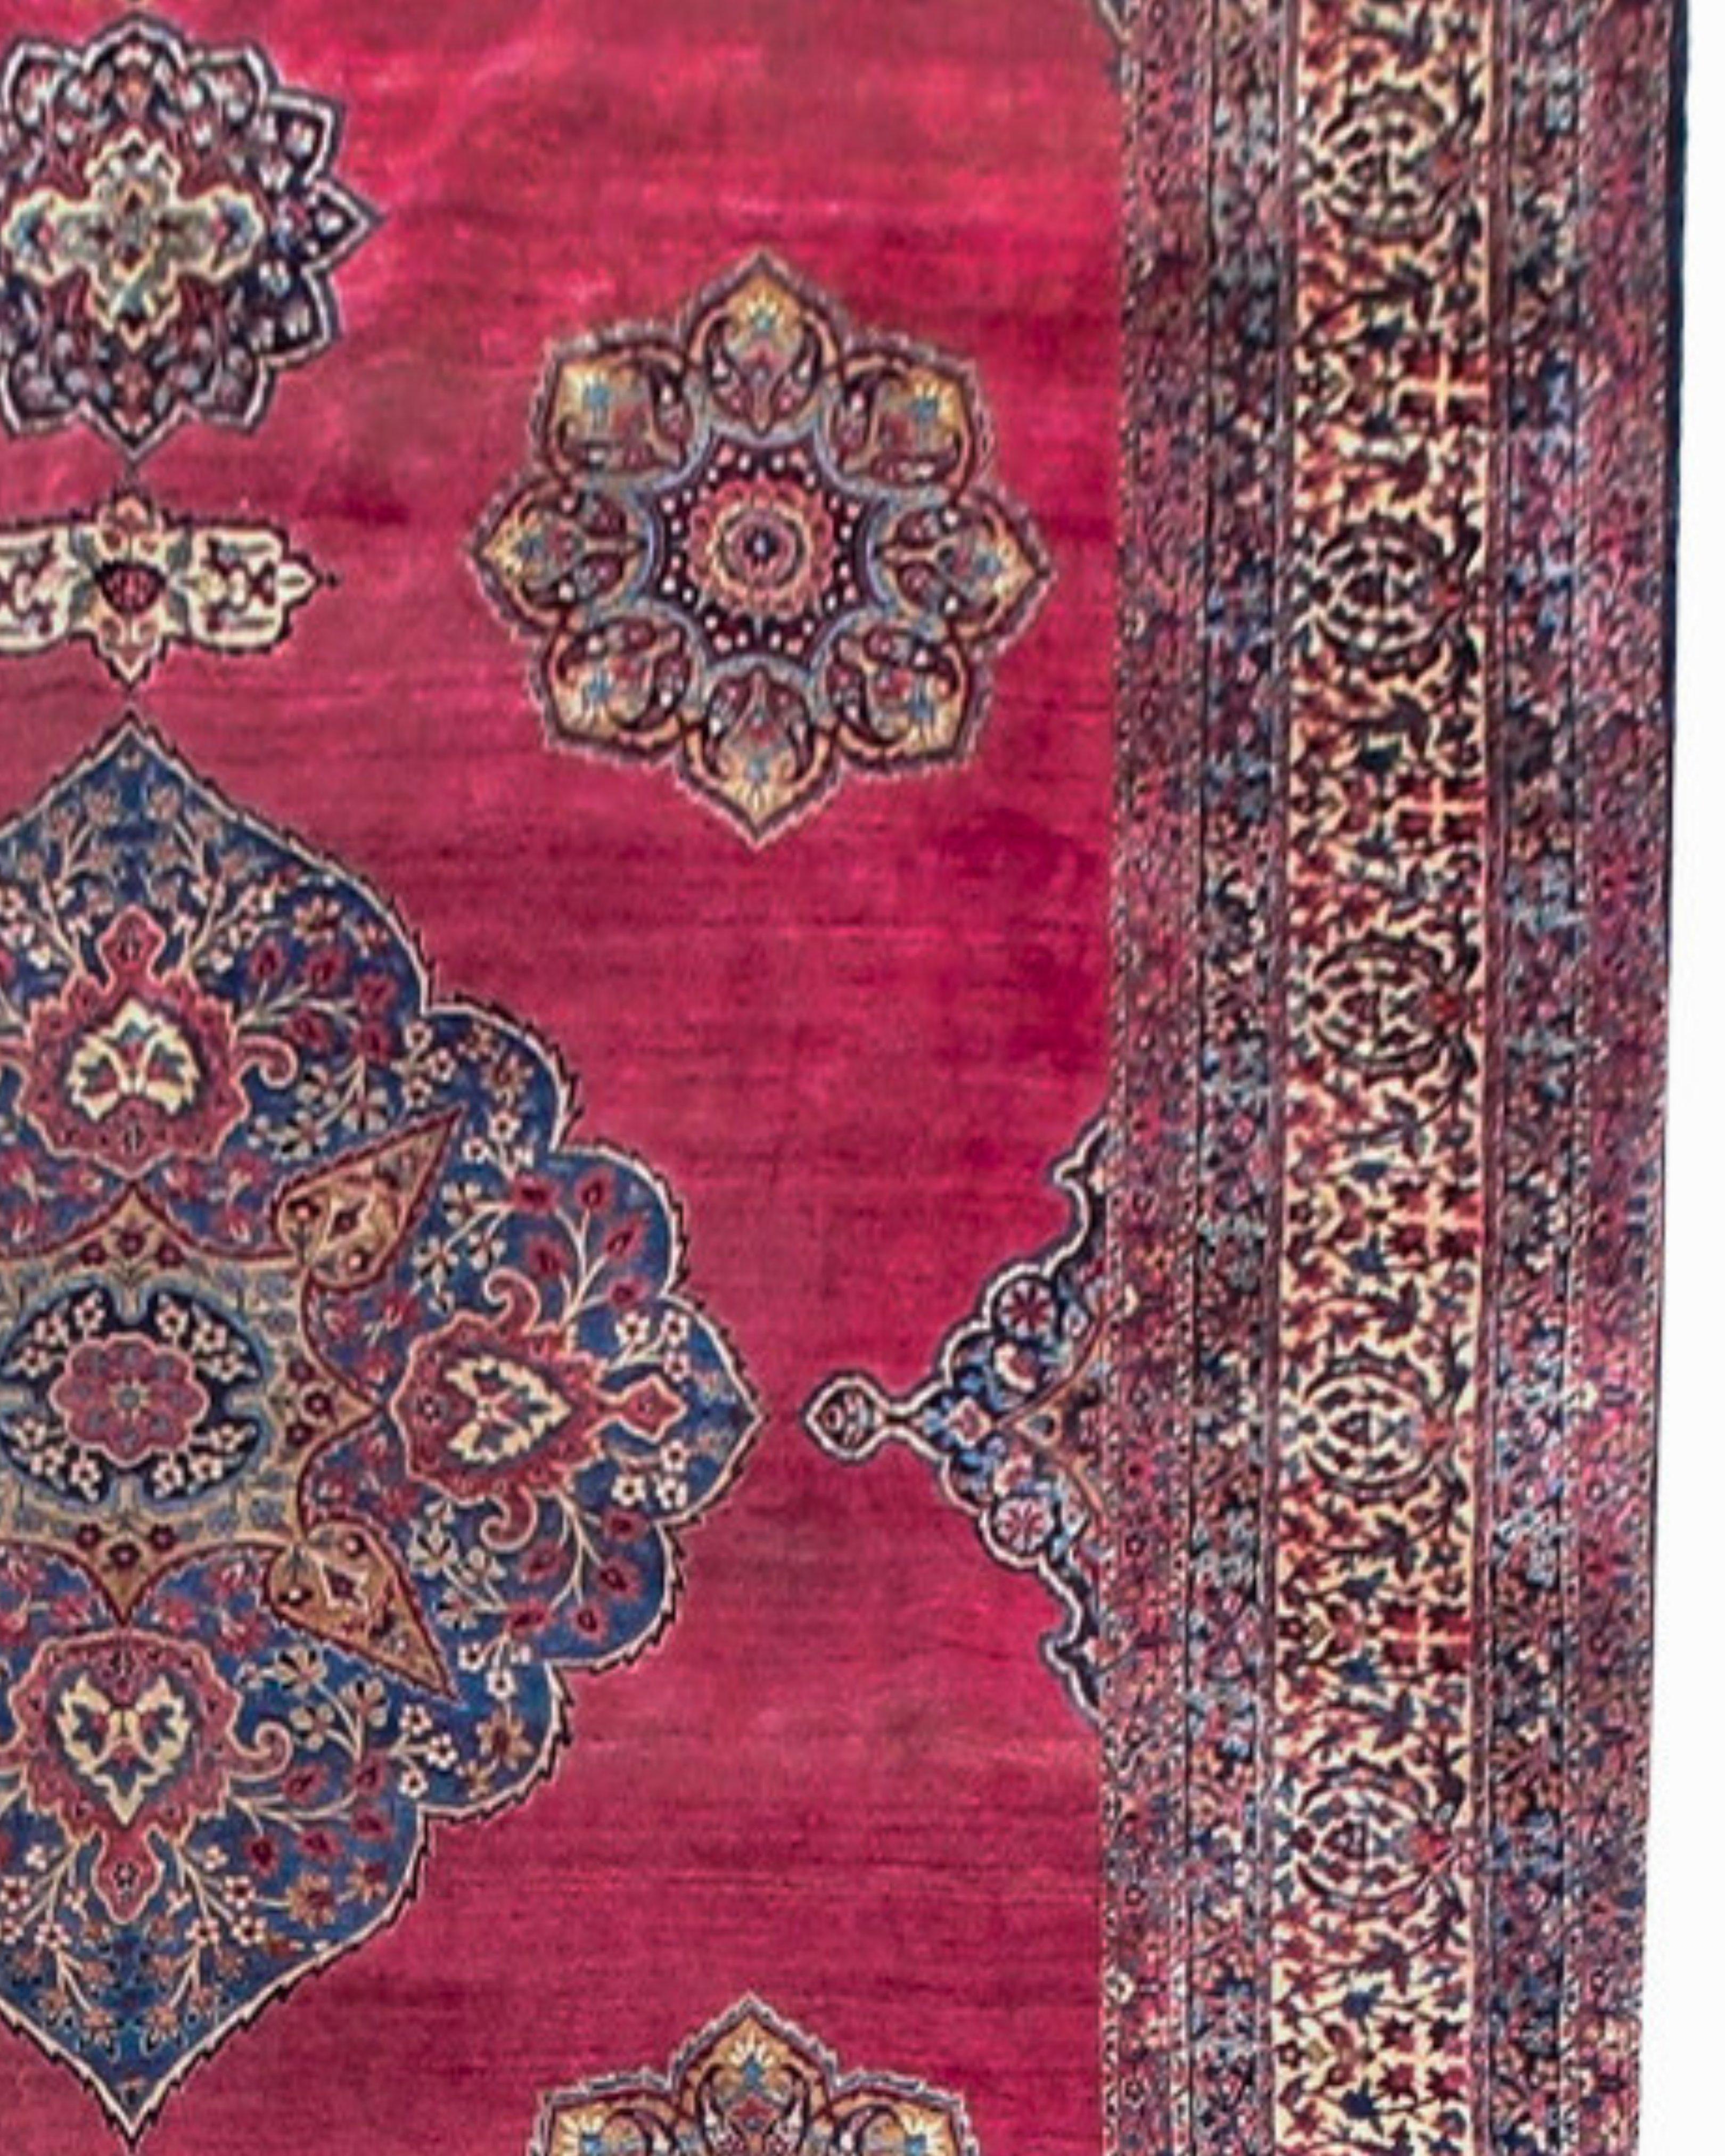 Hand-Knotted Antique Persian Oversized Kirman Rug, Early 20th Century For Sale